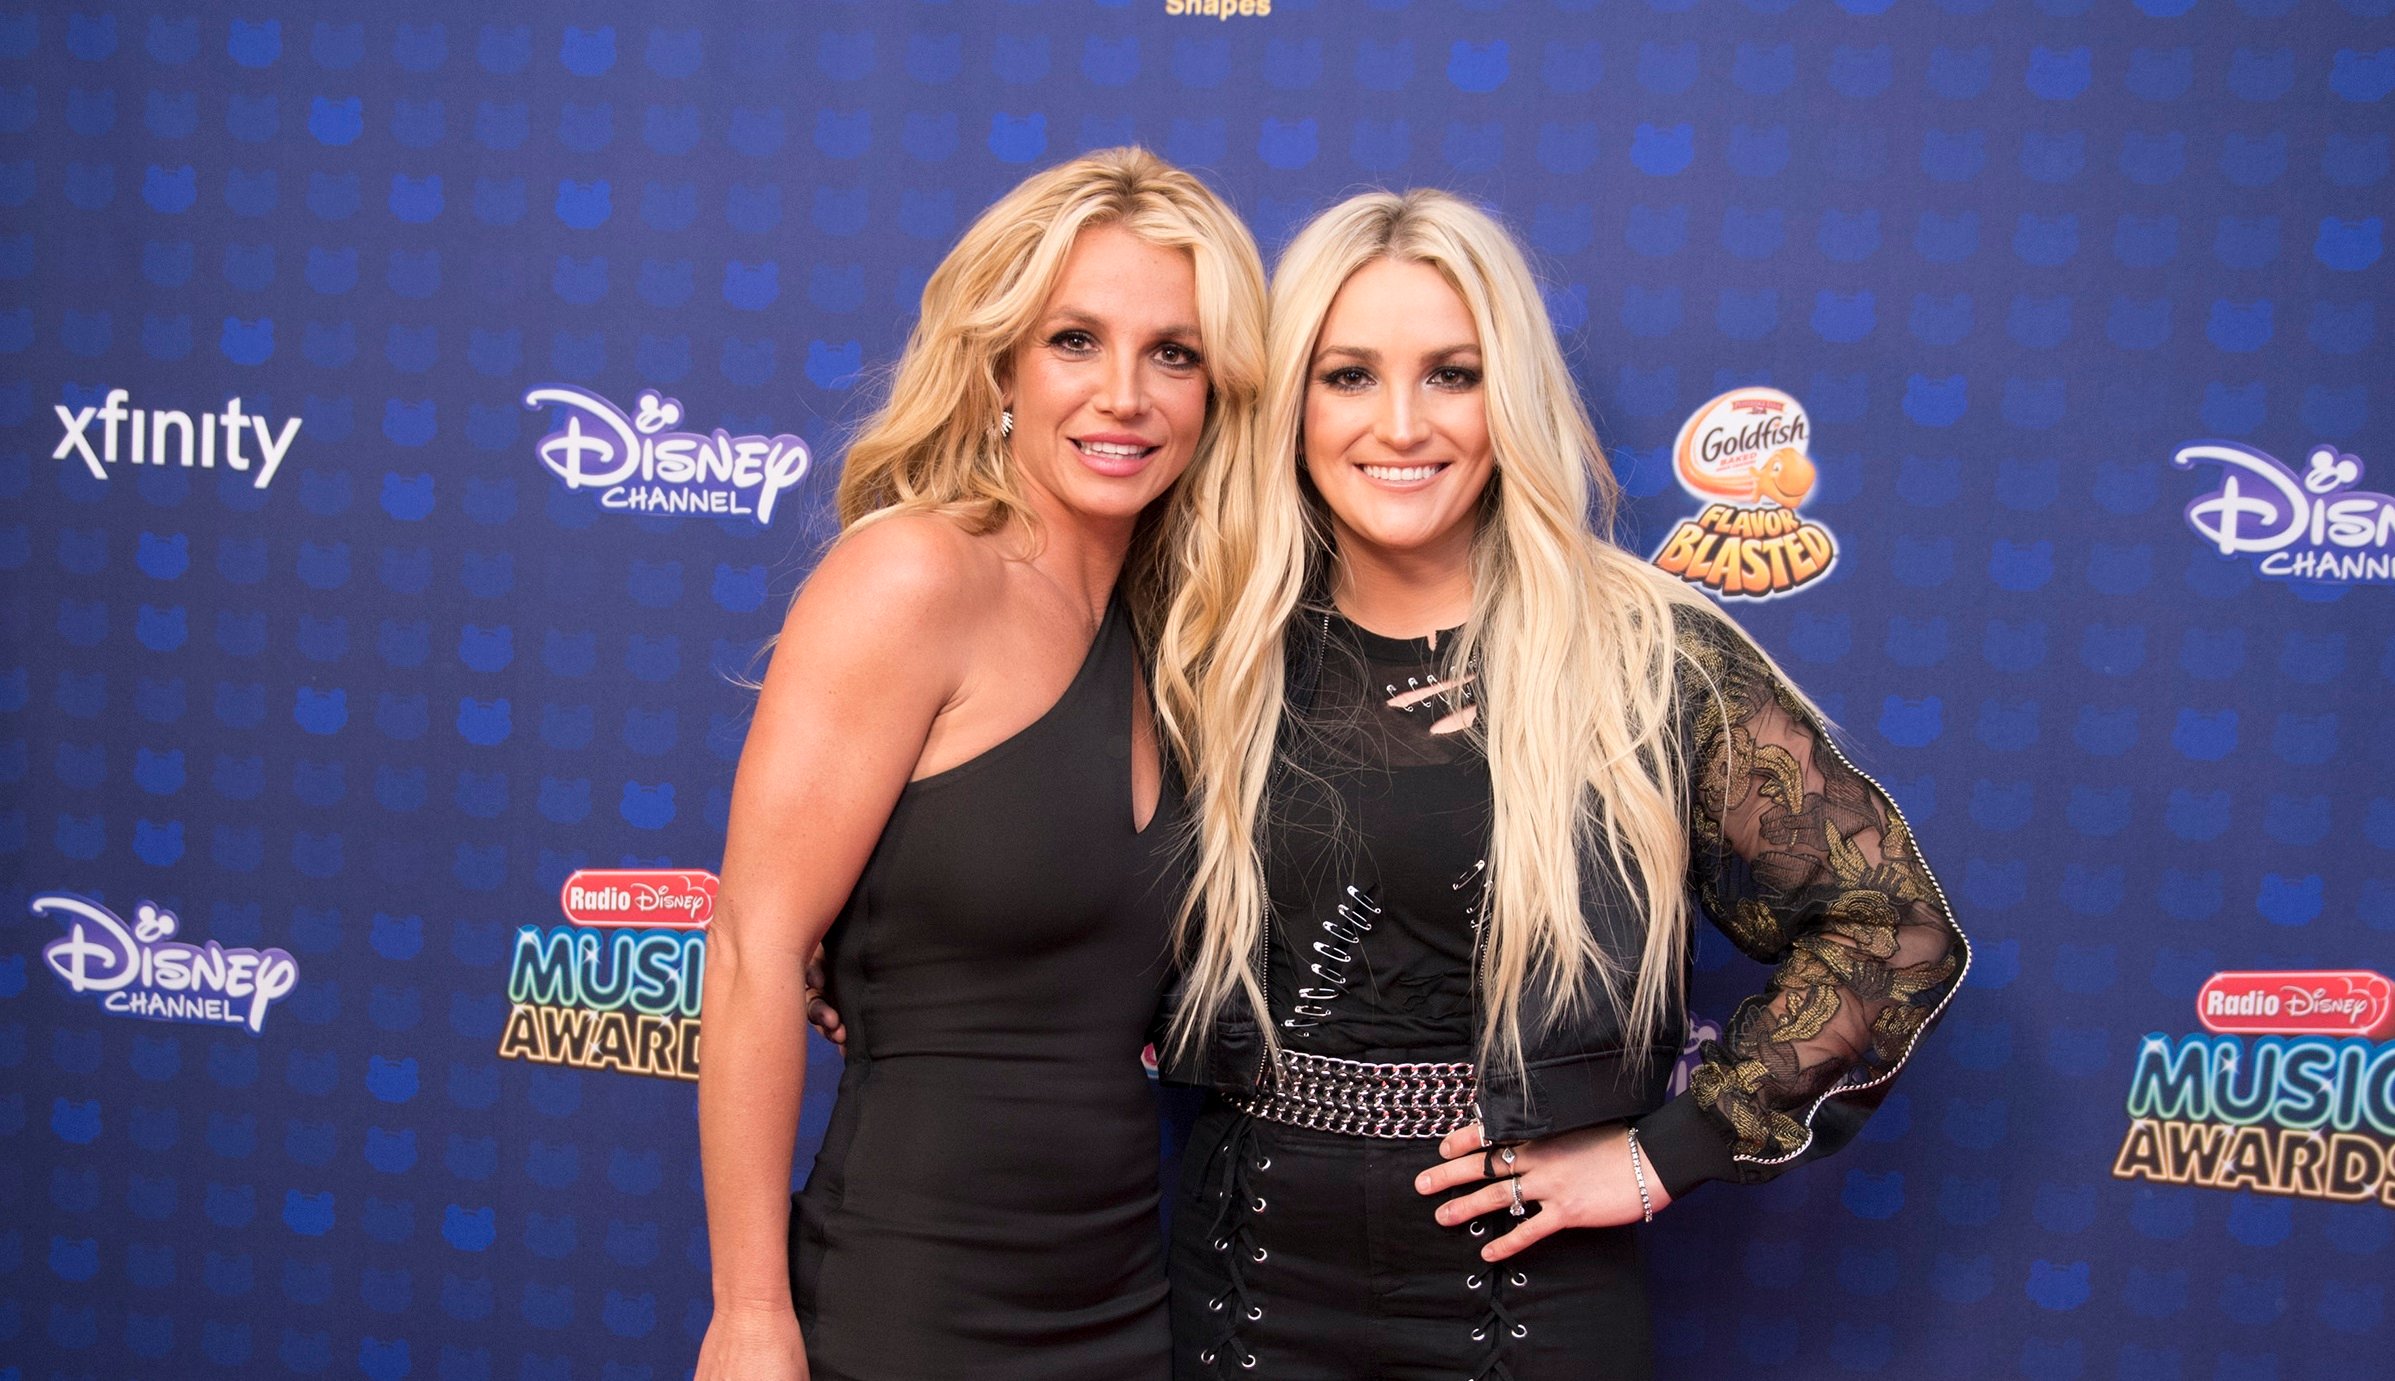 Britney Spears and Jamie Lynn Spears attend the 2017 Radio Disney Music Awards